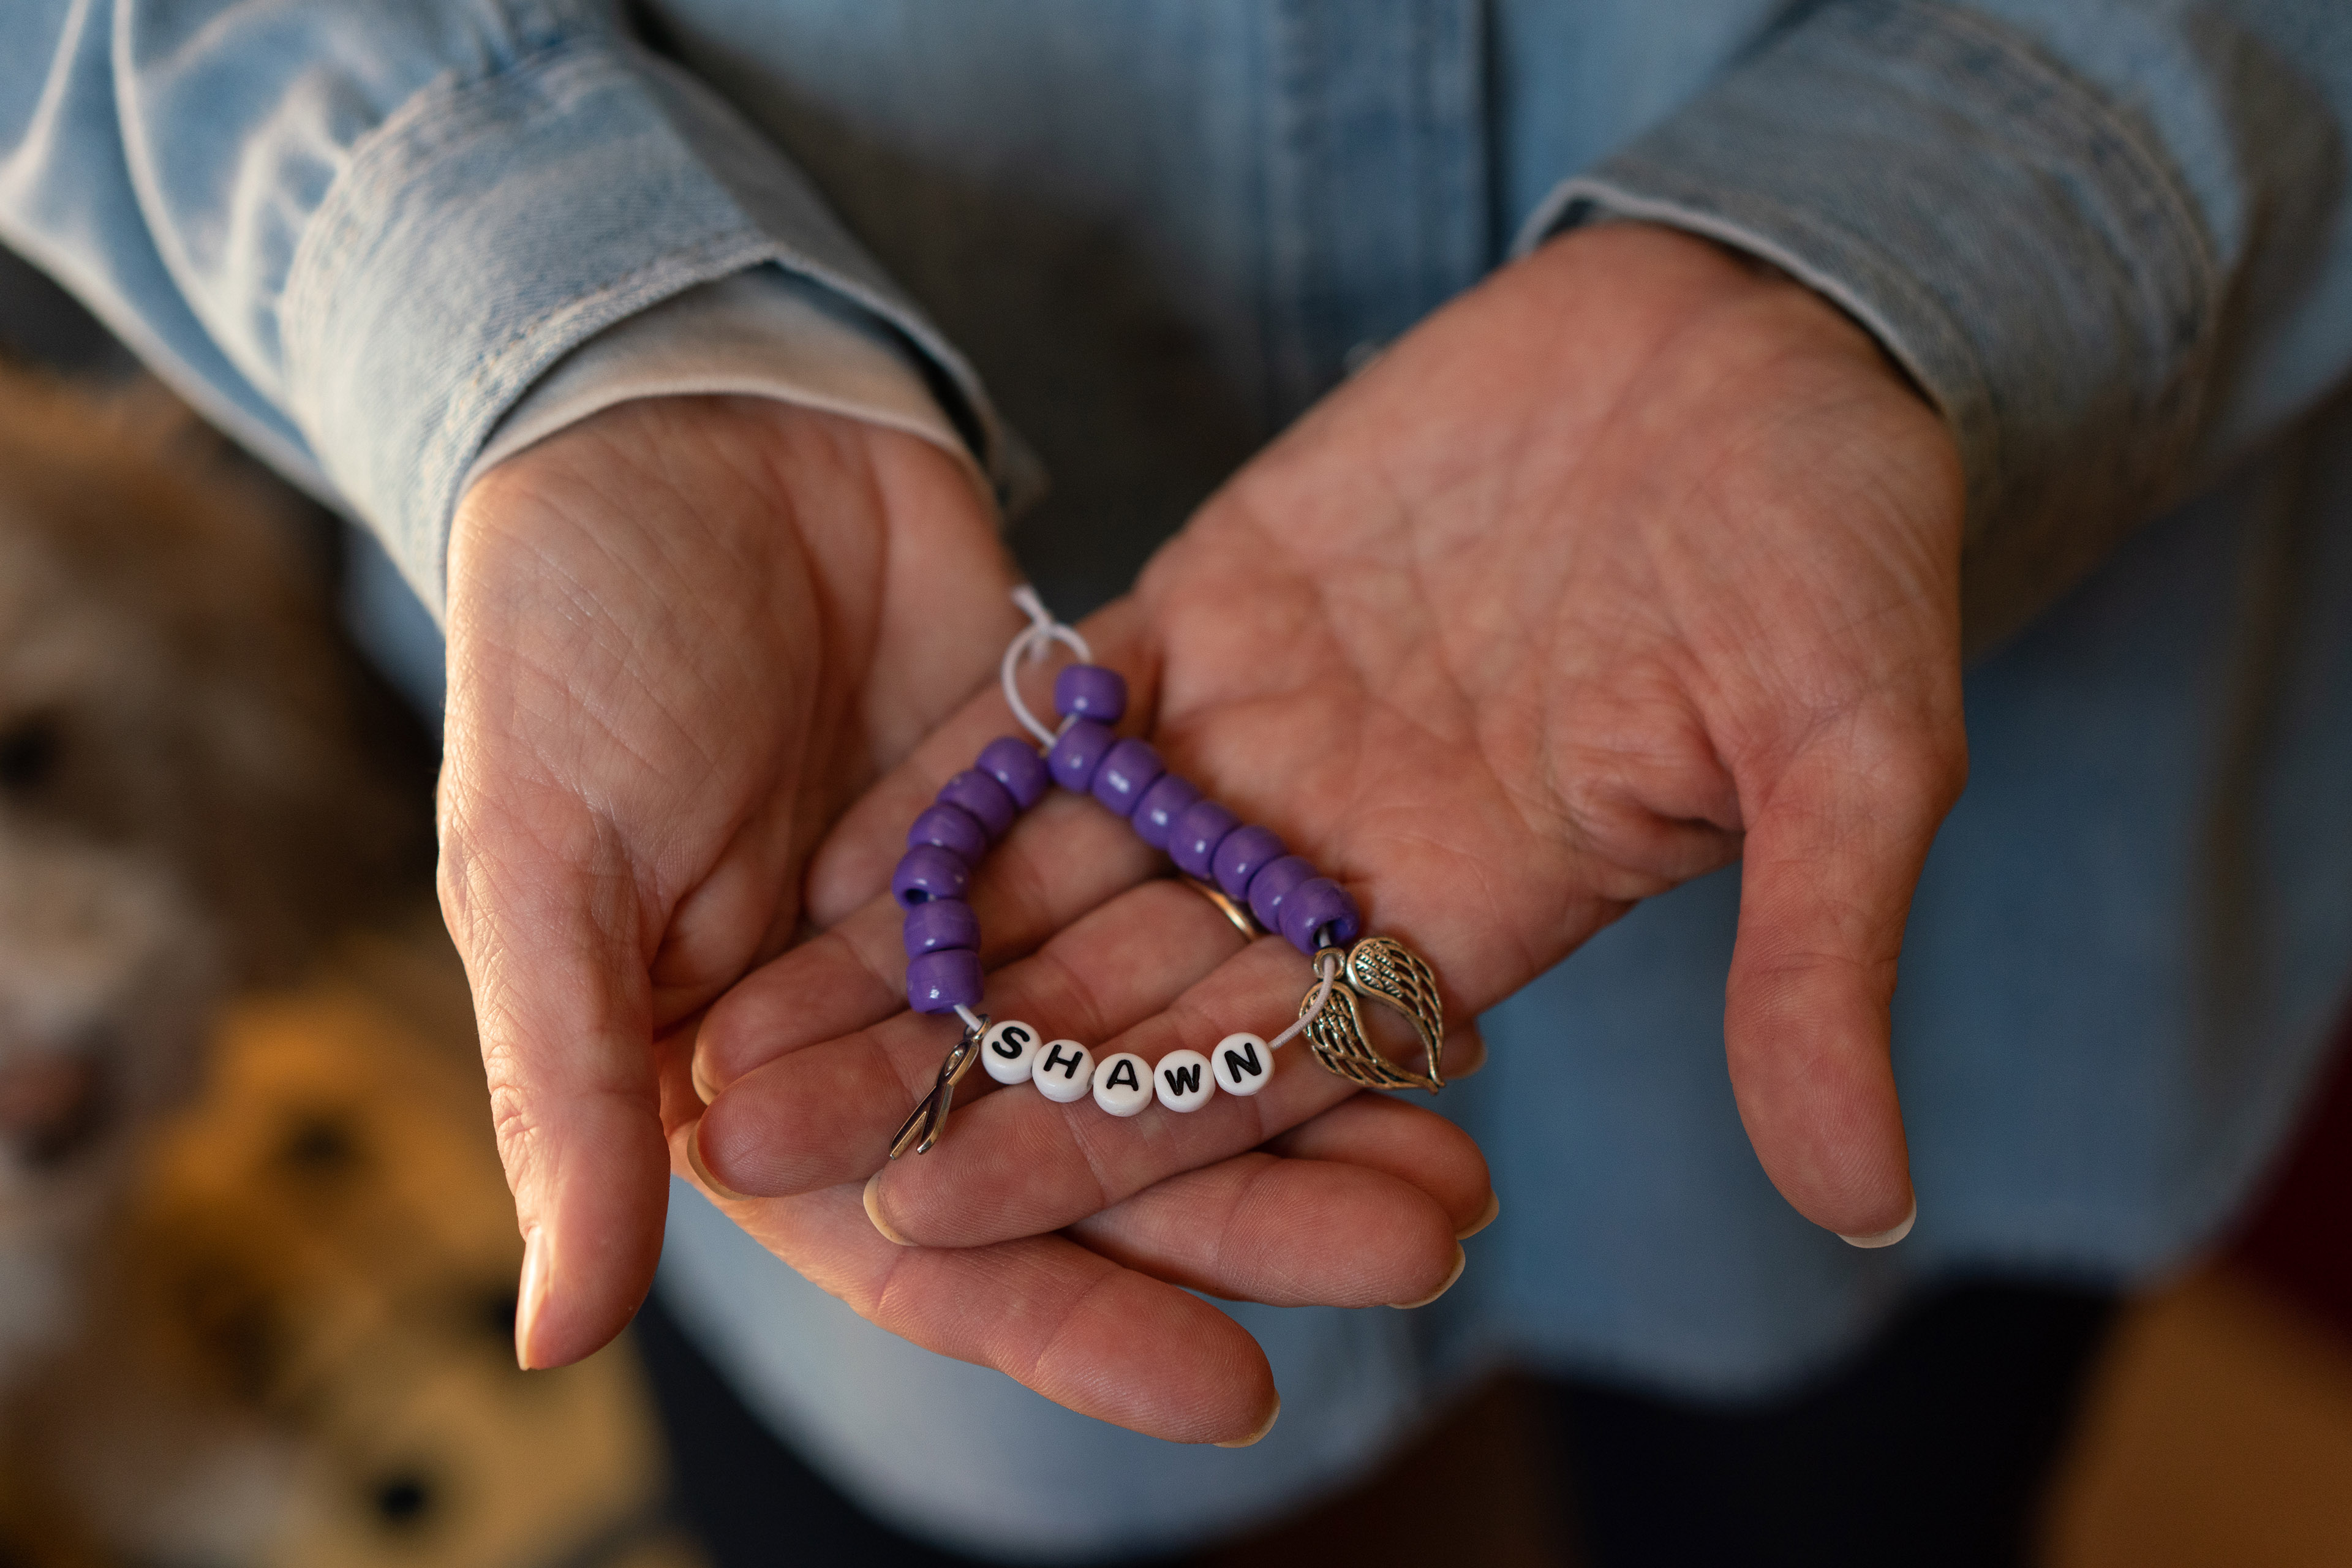 A close-up image of two hands holding a purple beaded bracelet with letter beads spelling "Shawn".